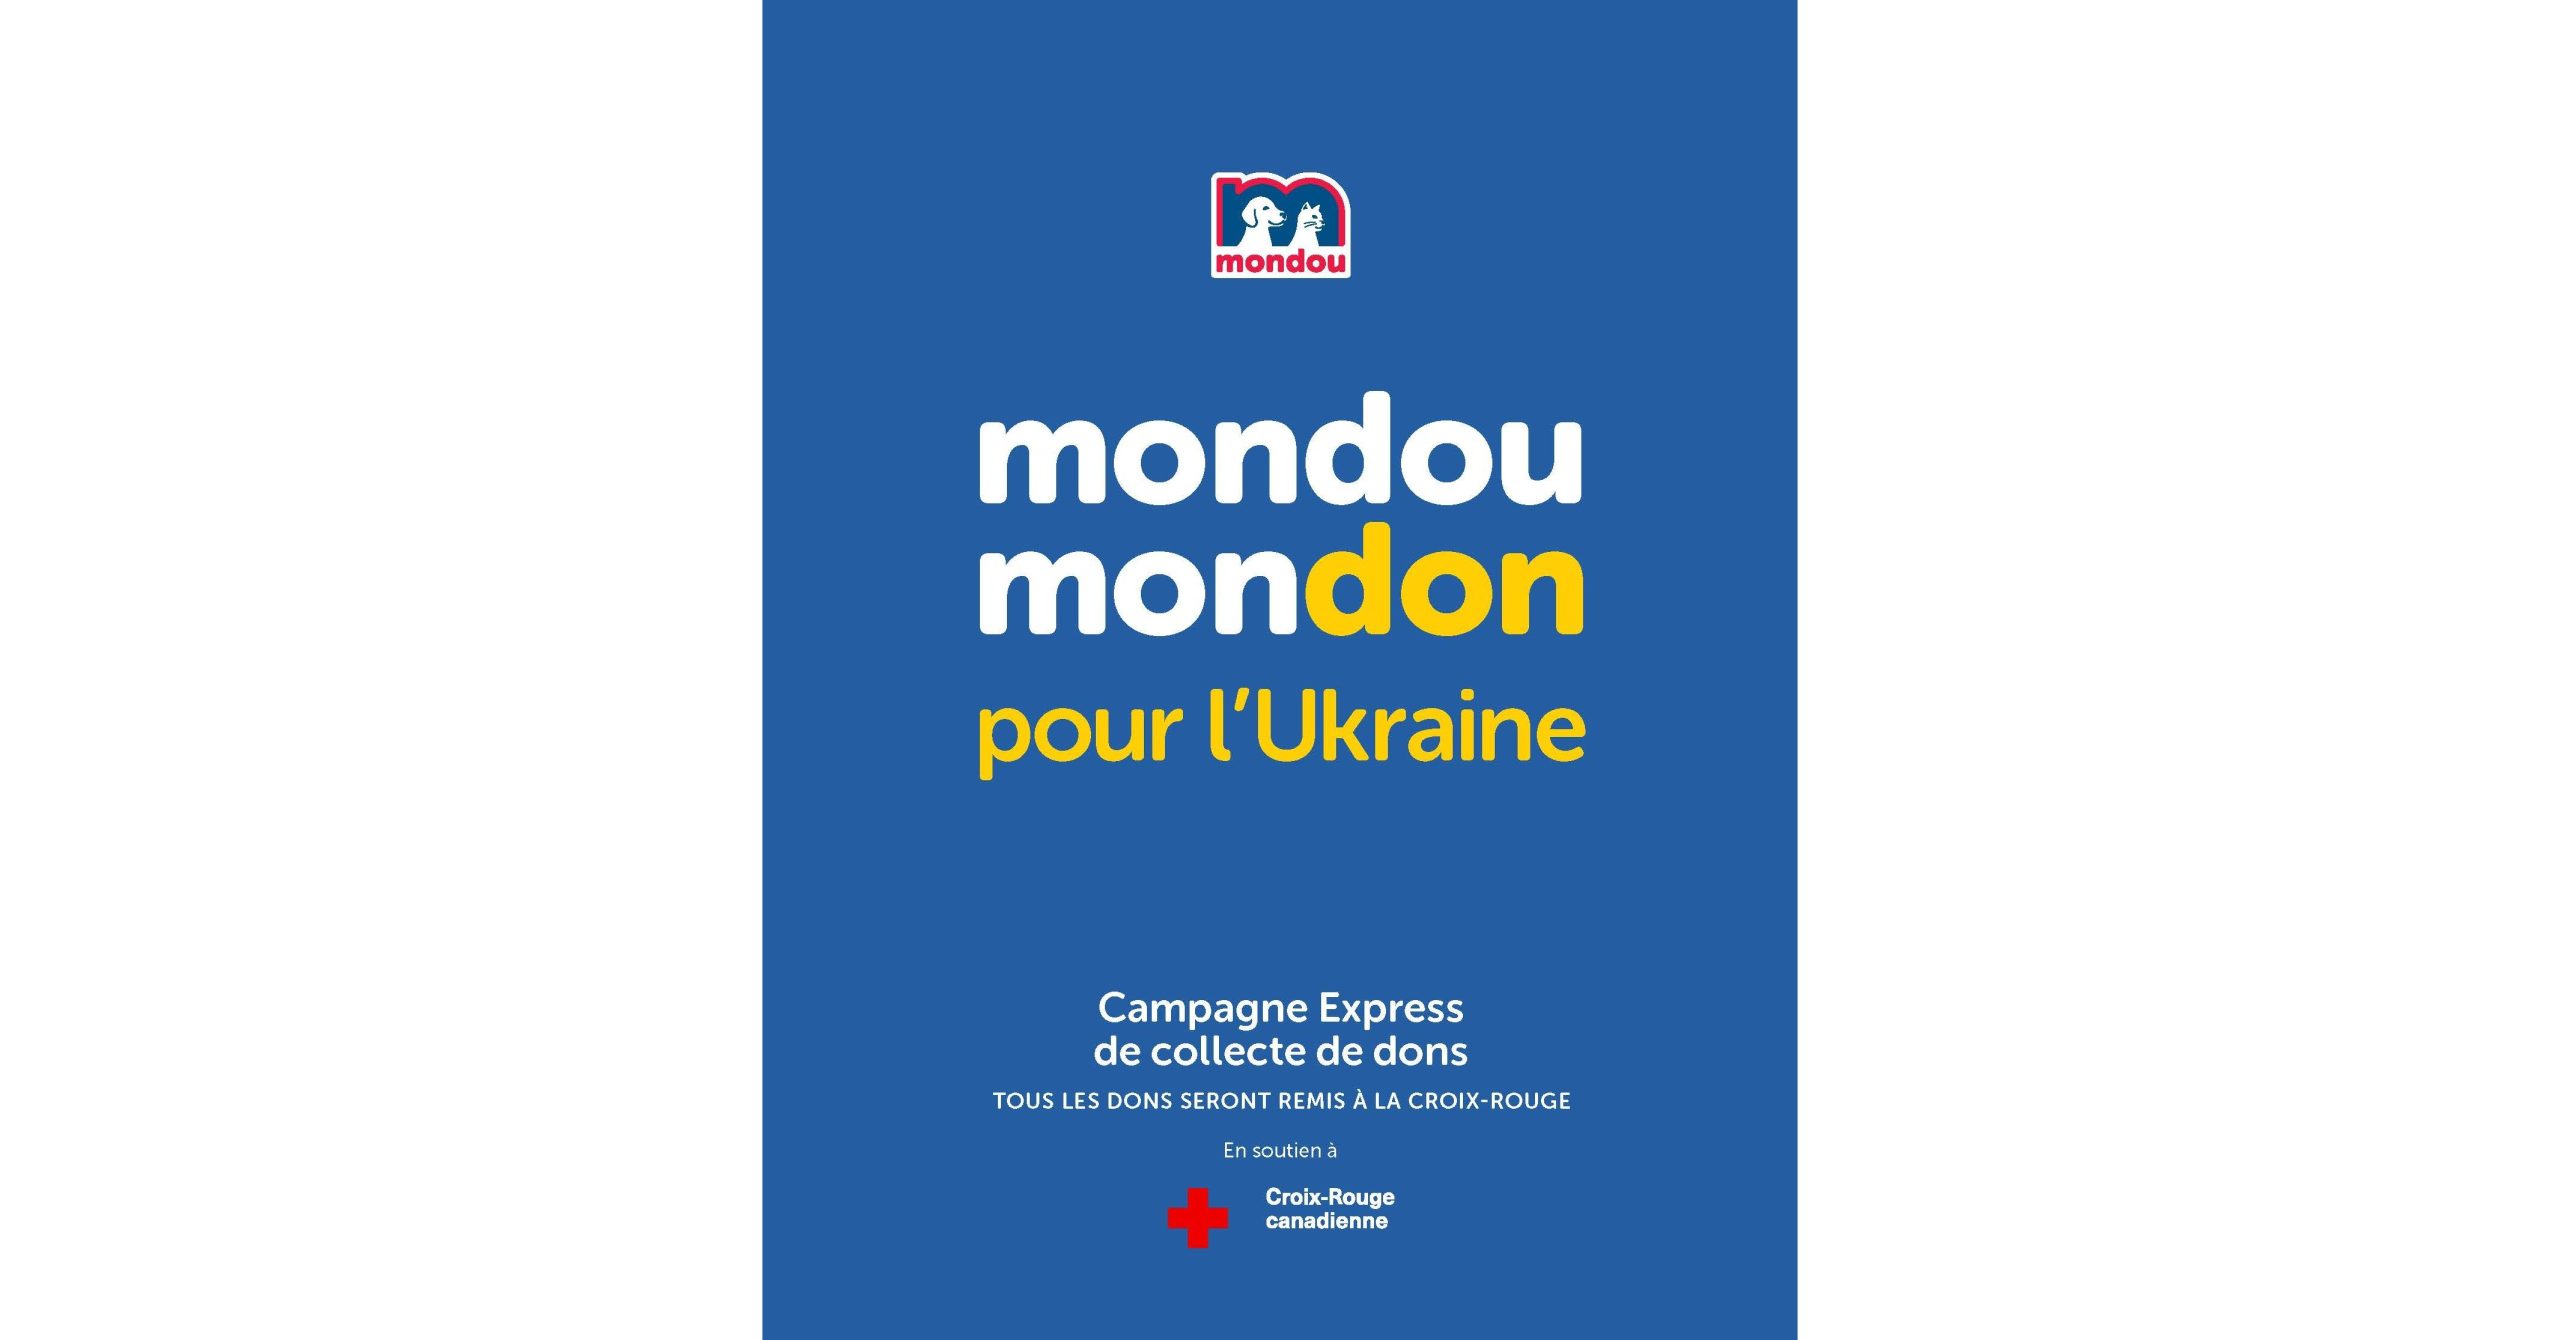 Mundo donates $100,000 to the Canadian Red Cross and begins major fundraising for the humanitarian crisis in Ukraine

